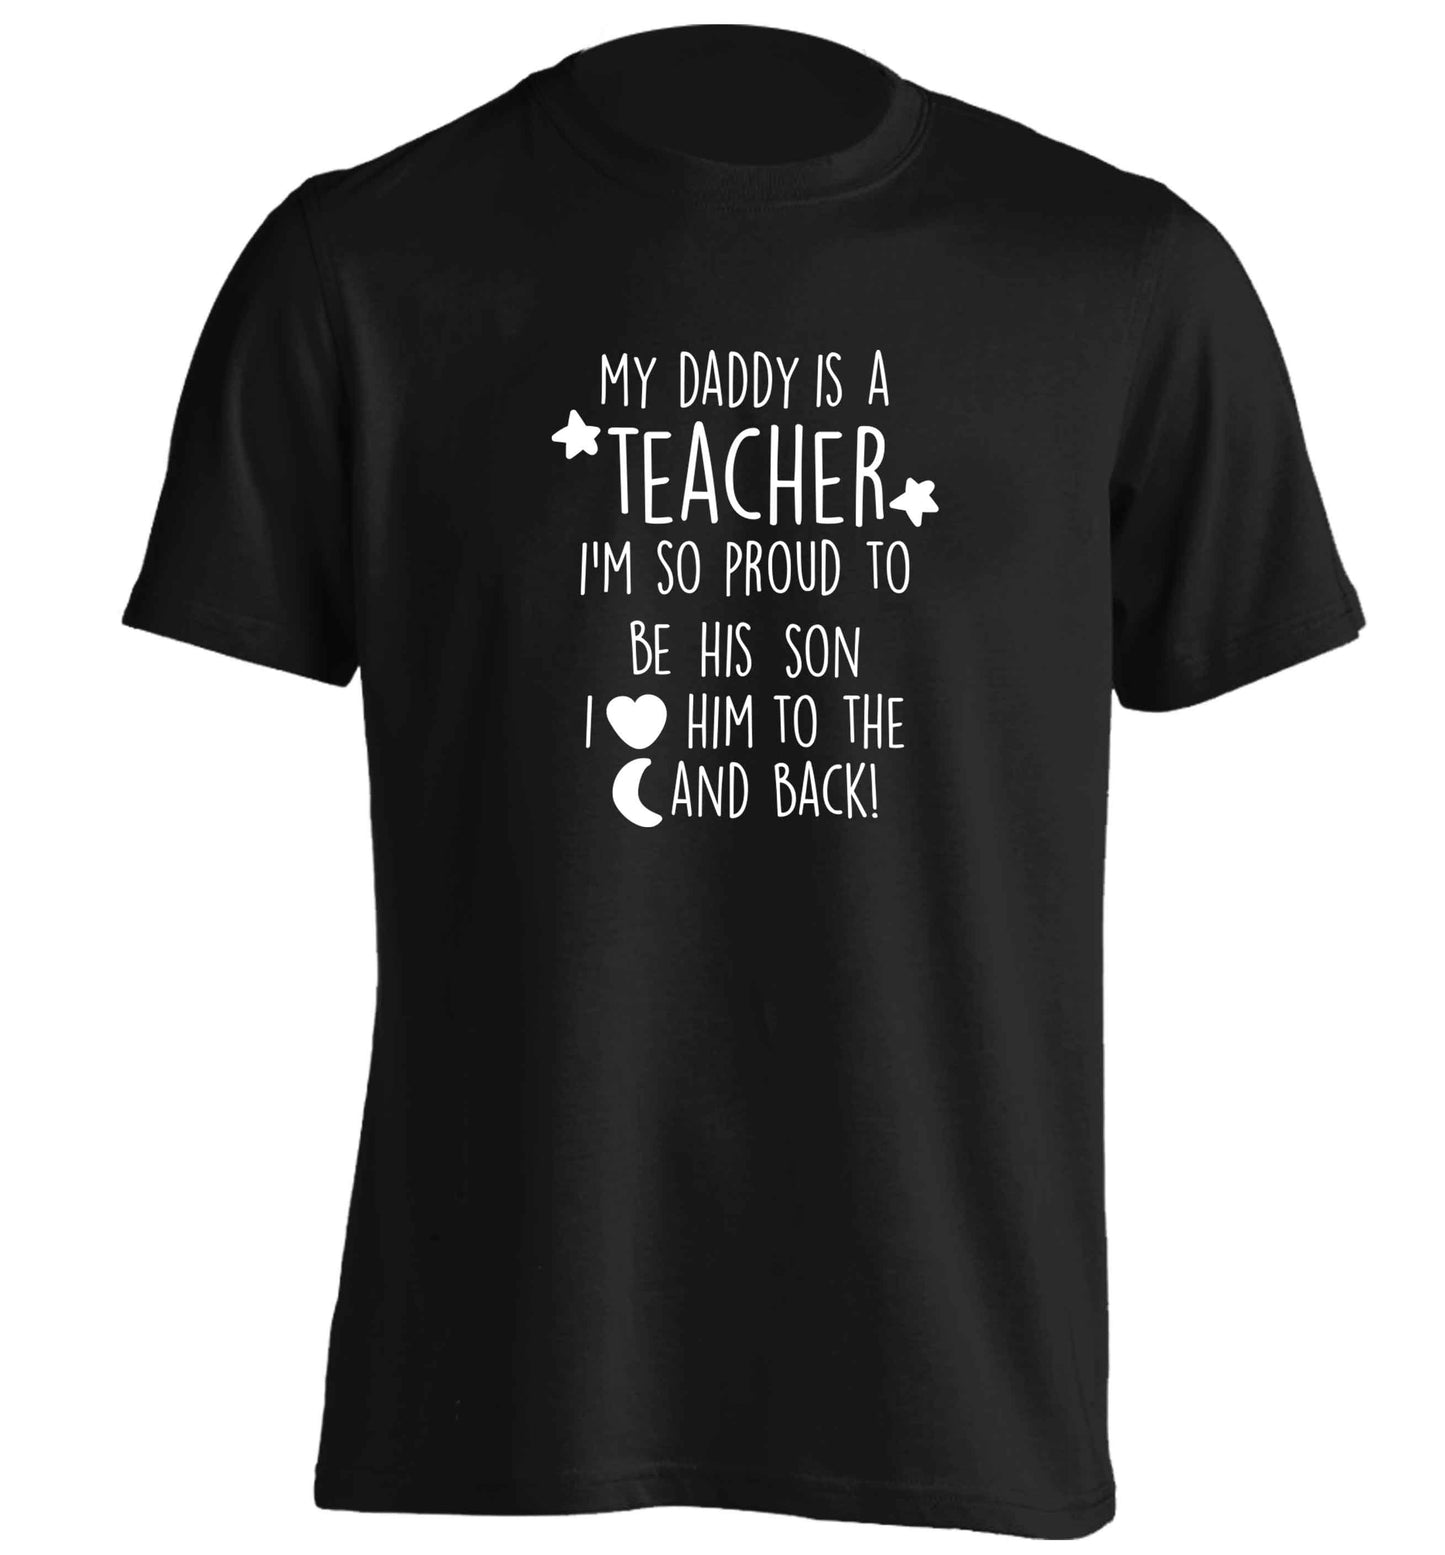 My daddy is a teacher I'm so proud to be his son I love her to the moon and back adults unisex black Tshirt 2XL